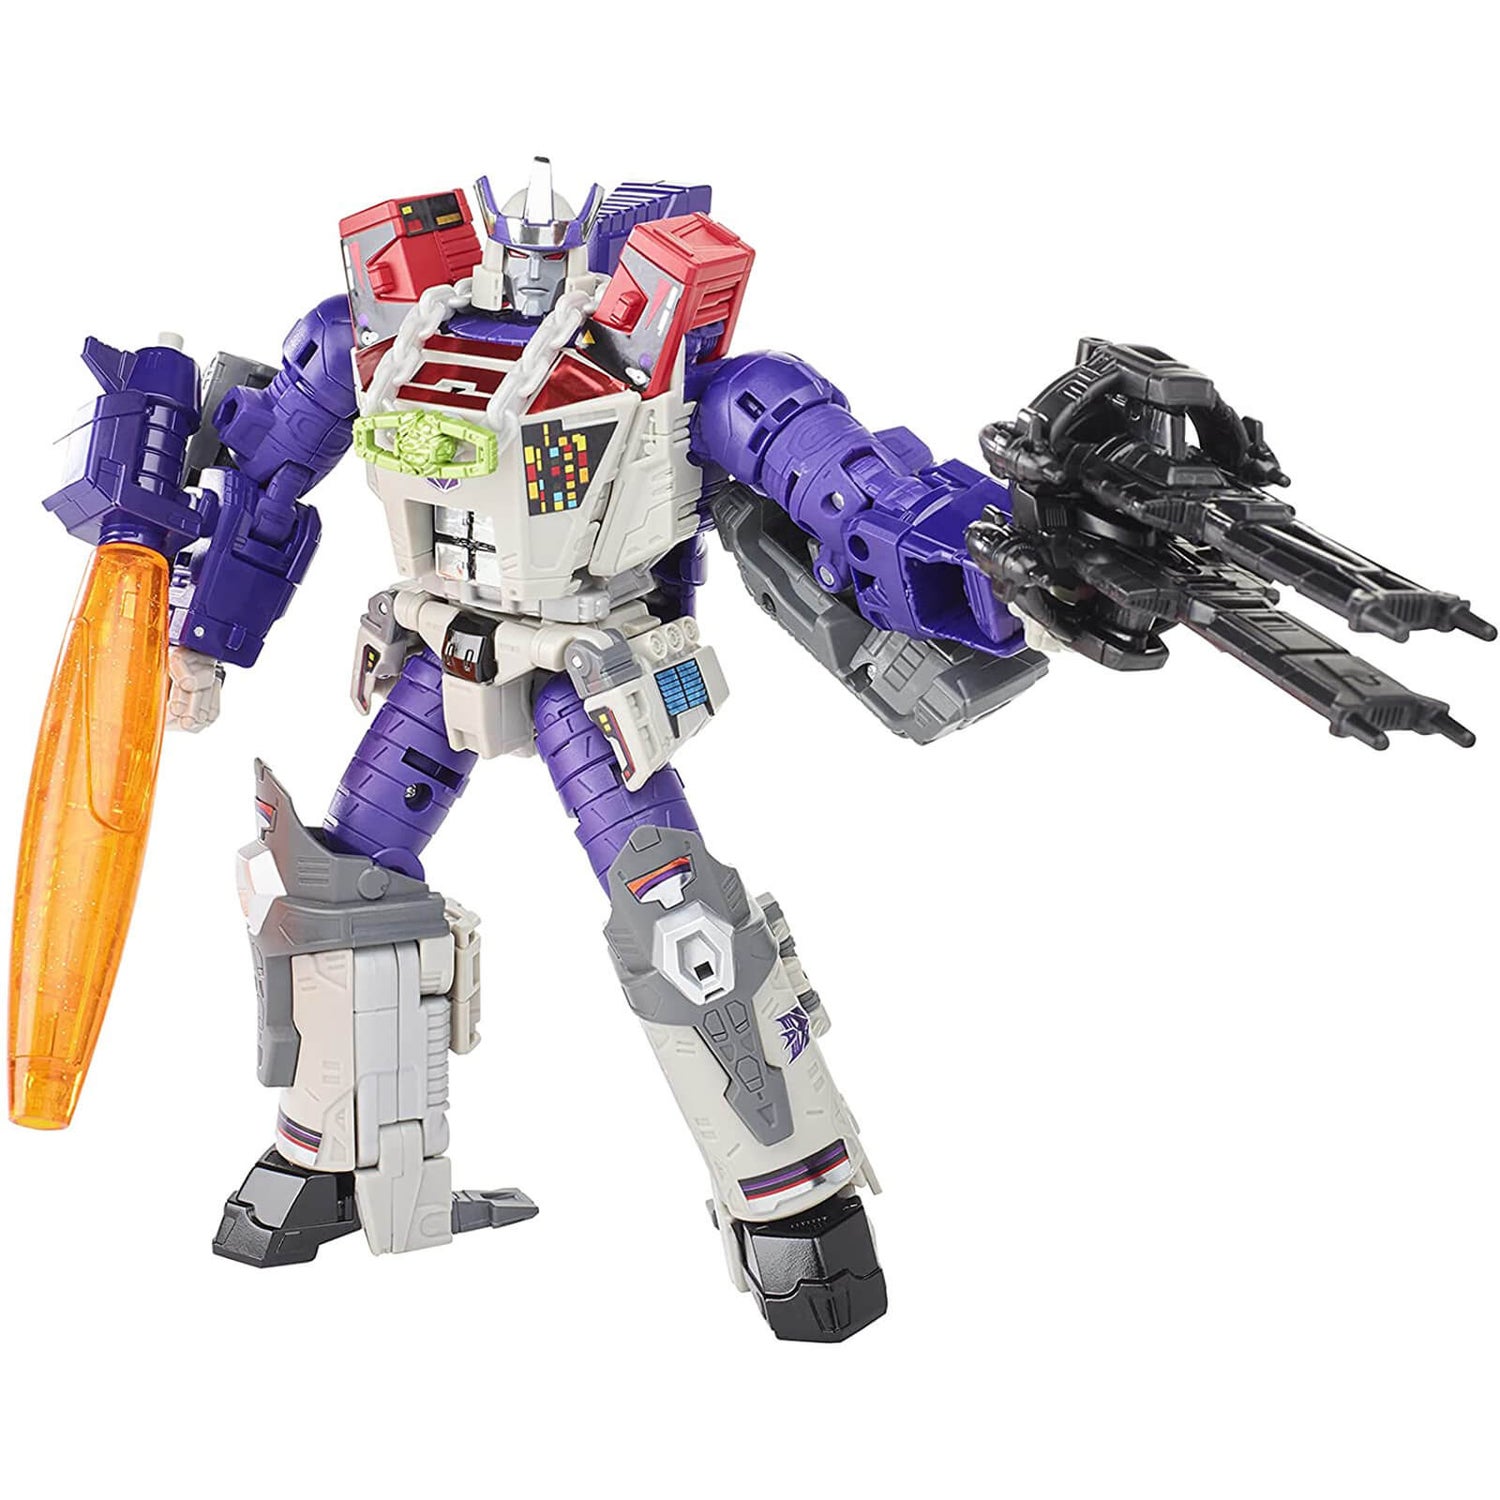 Hasbro Transformers Generations Selects 7" WFC-GS27 Galvatron Leader Class Collector Figure